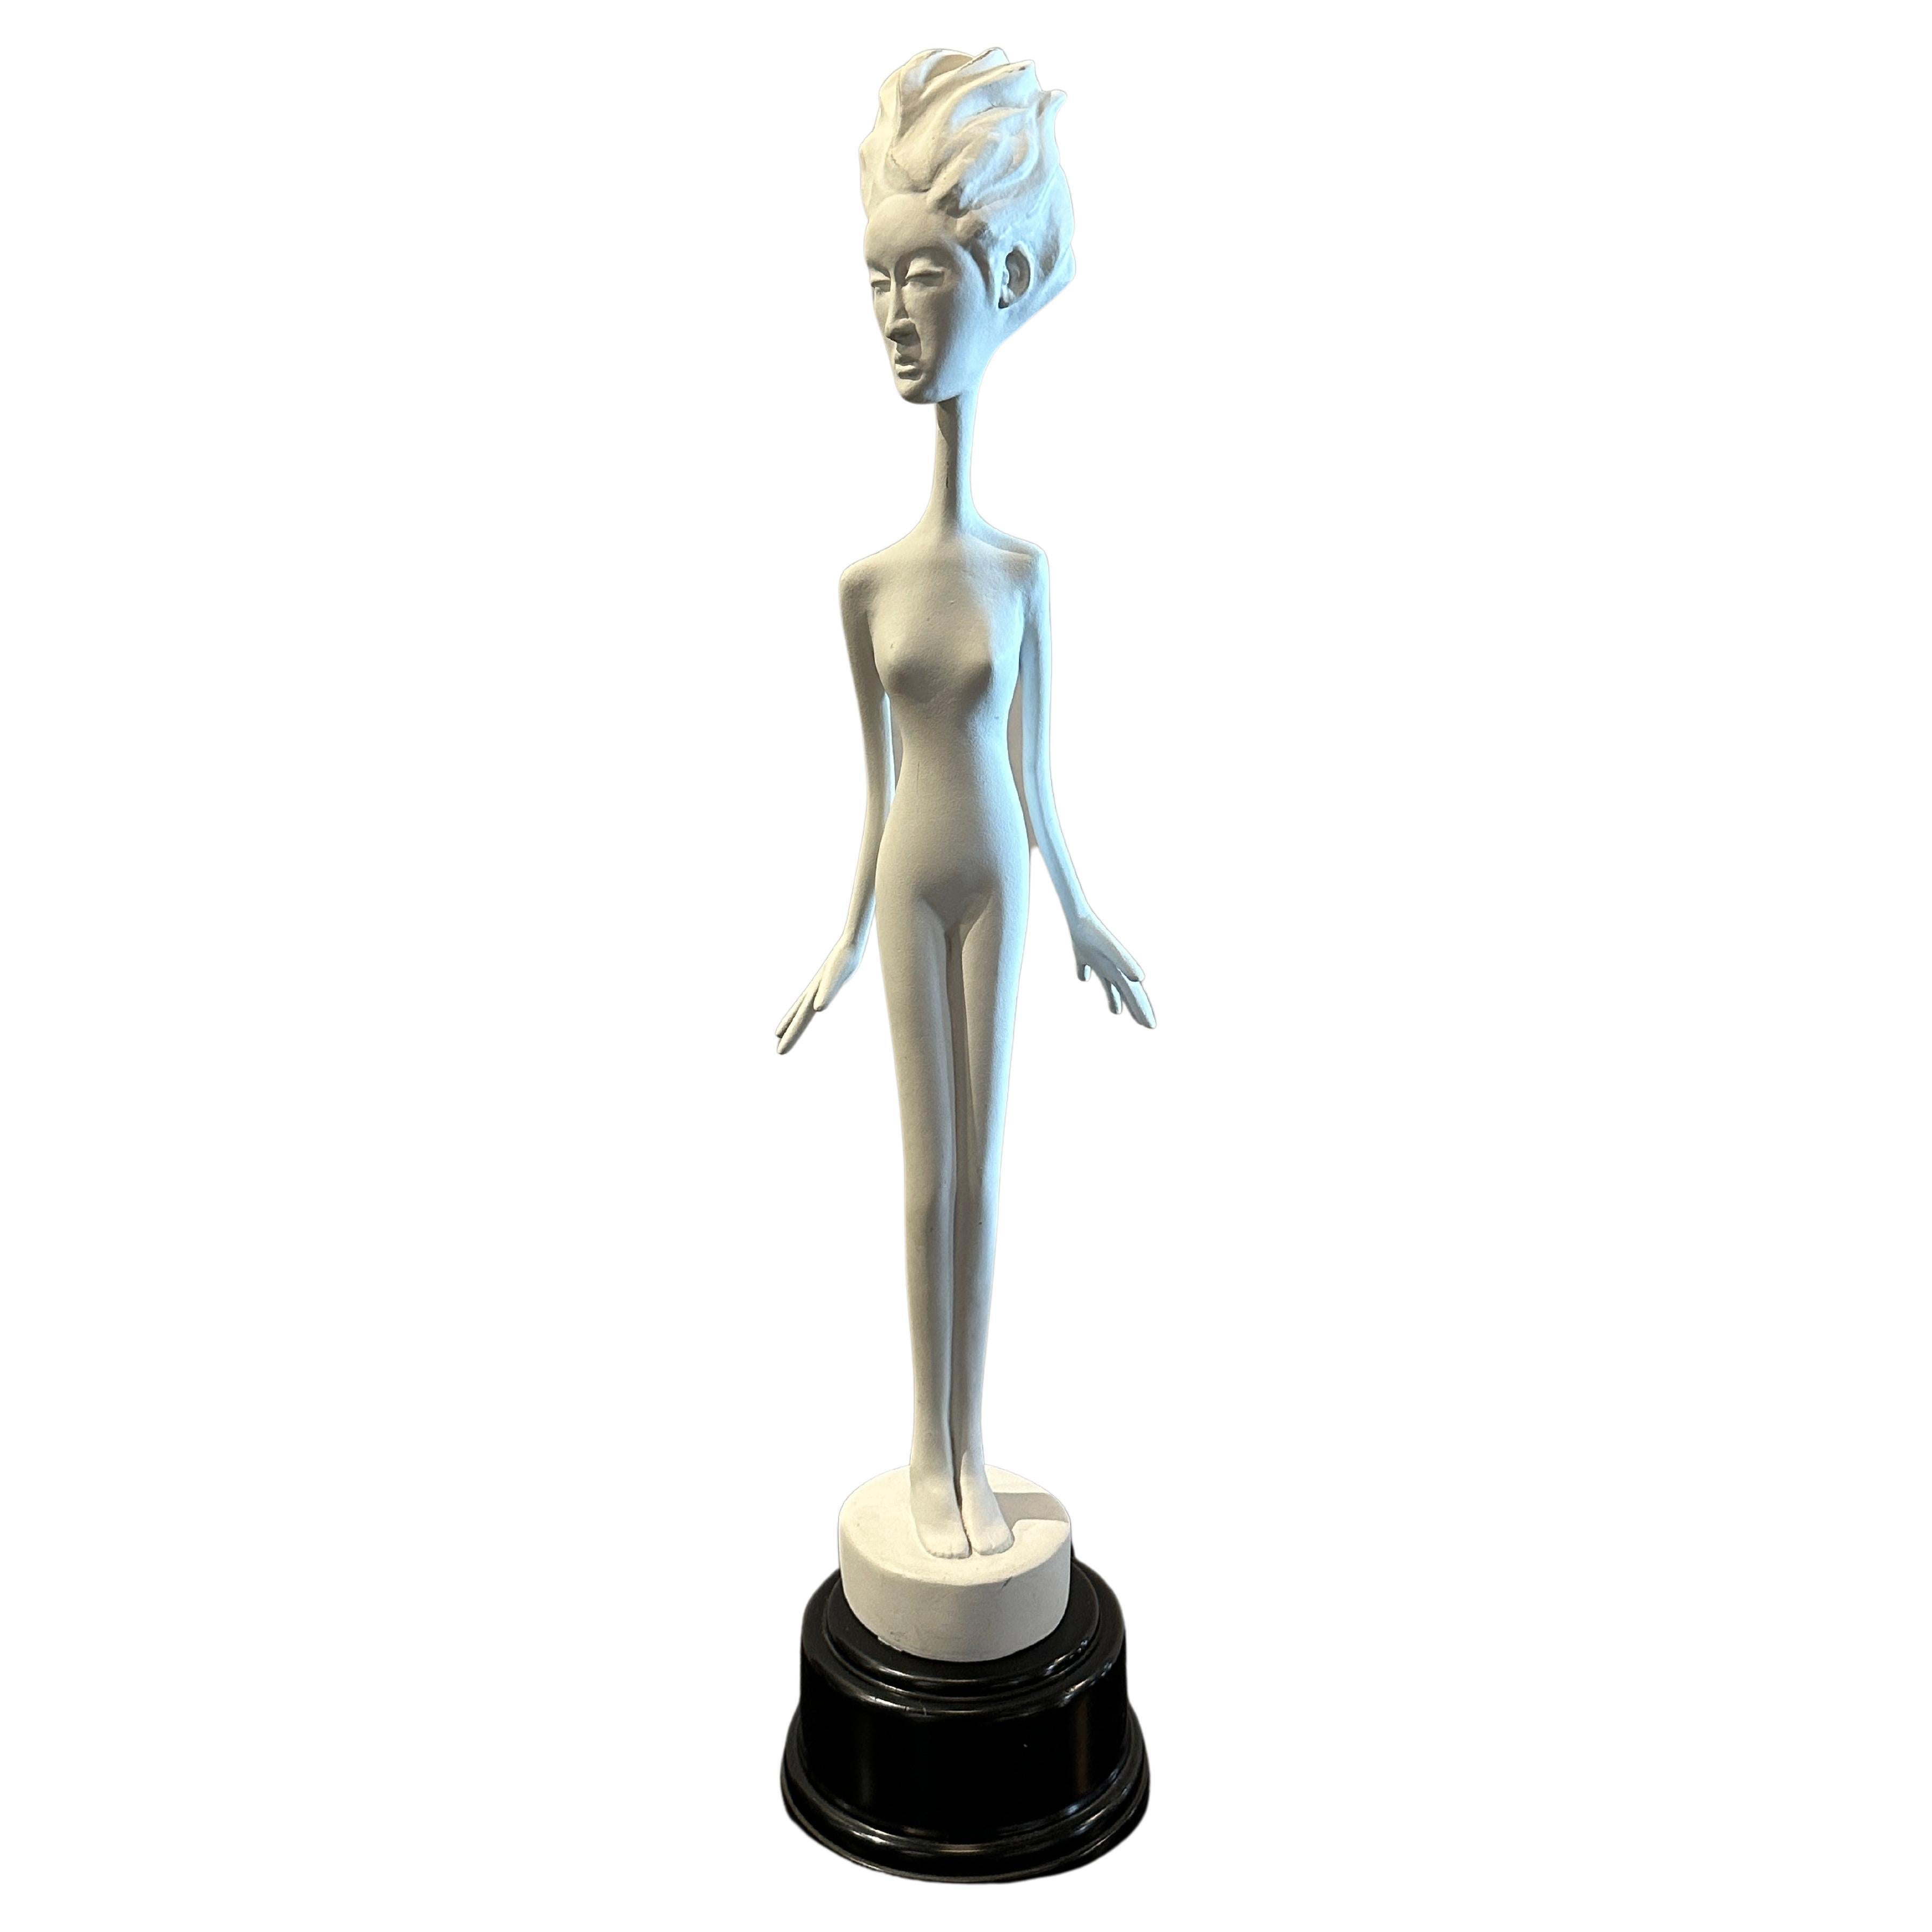 "A Visitor from Beyond" a White Plaster Statue For Sale